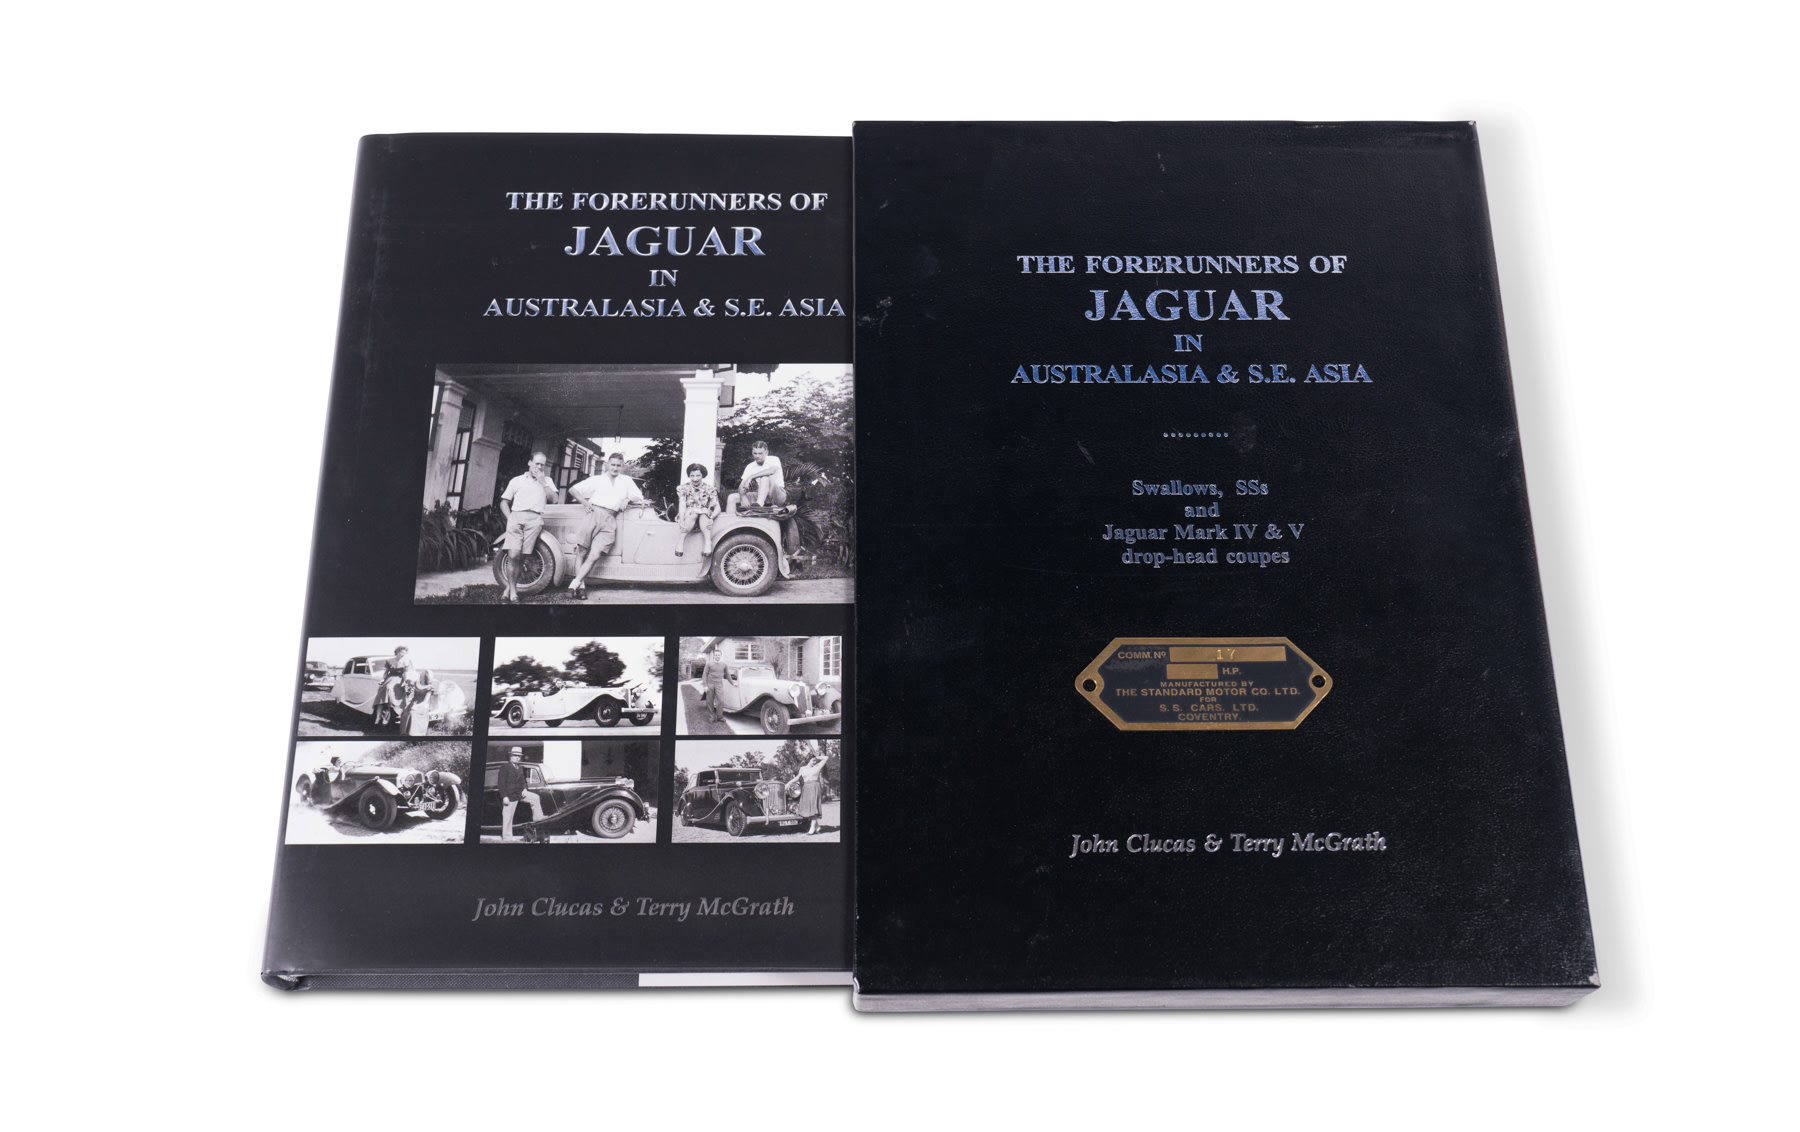 The Forerunners of Jaguar in Australasia & S.E. Asia by John Clucas and Terry McGrath, No. 17 of 500